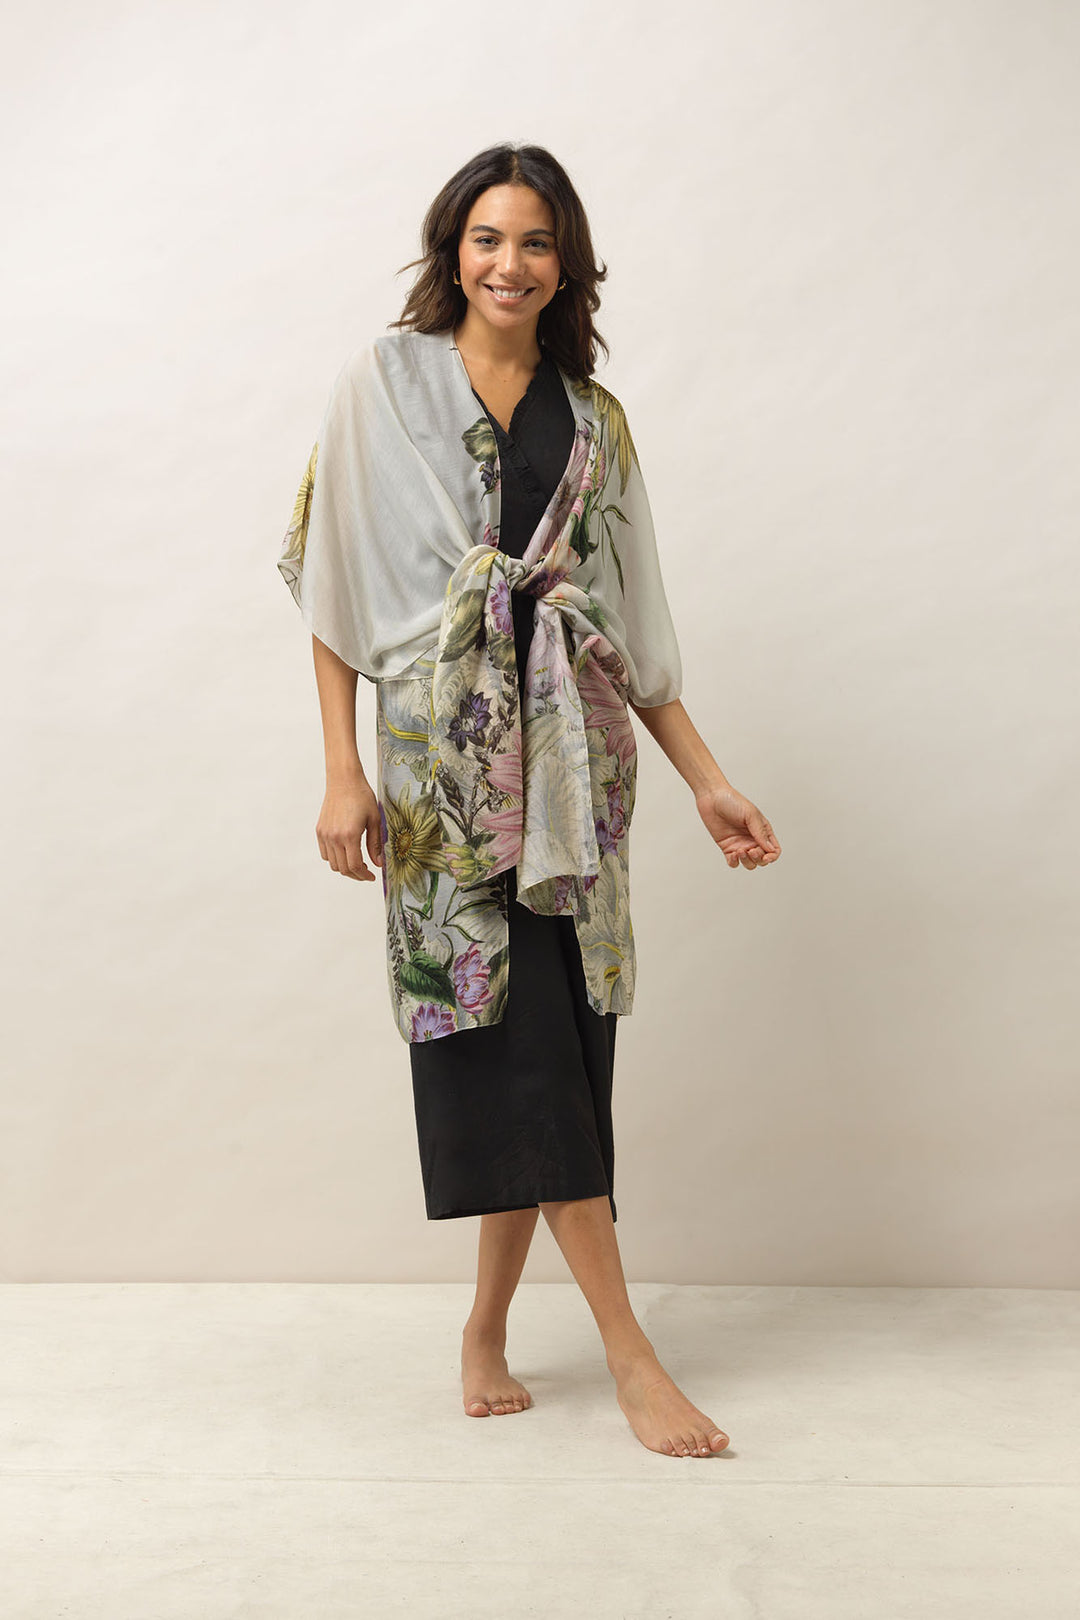 Women's lightweight throwover shawl in stone with daisy floral print by One Hundred Stars